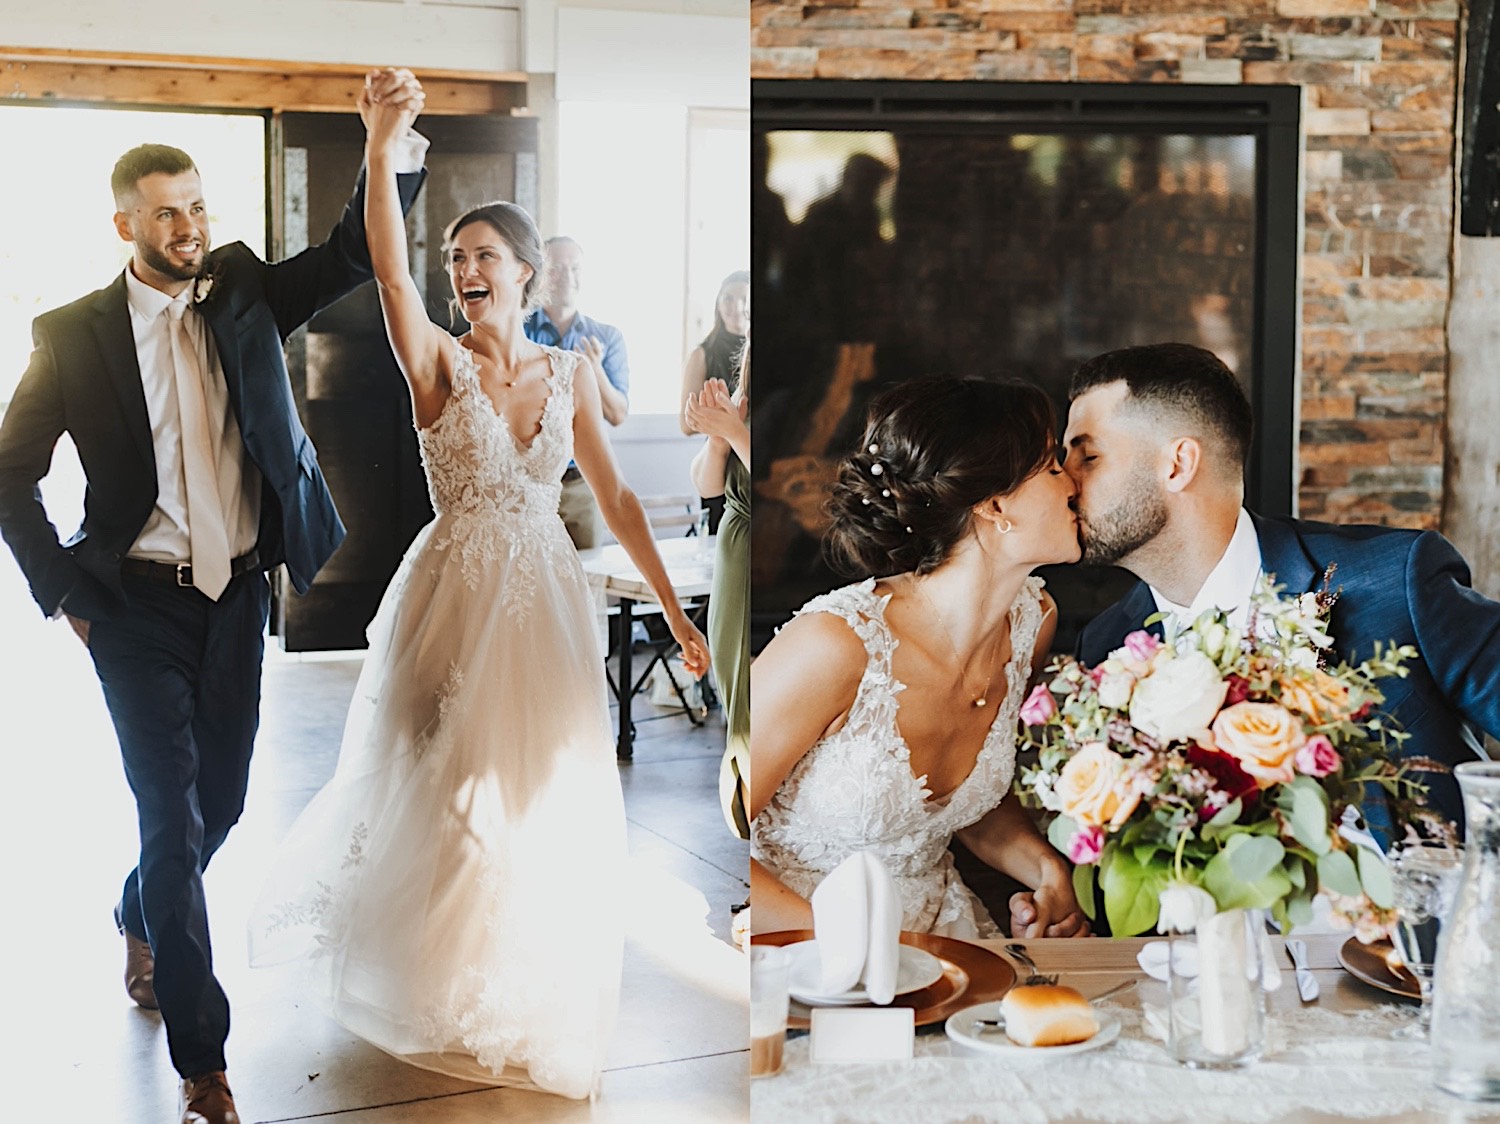 2 photos side by side, the left is of a bride and groom celebrating as they enter their wedding reception space, the right is of the bride and groom kissing while sitting at their wedding reception